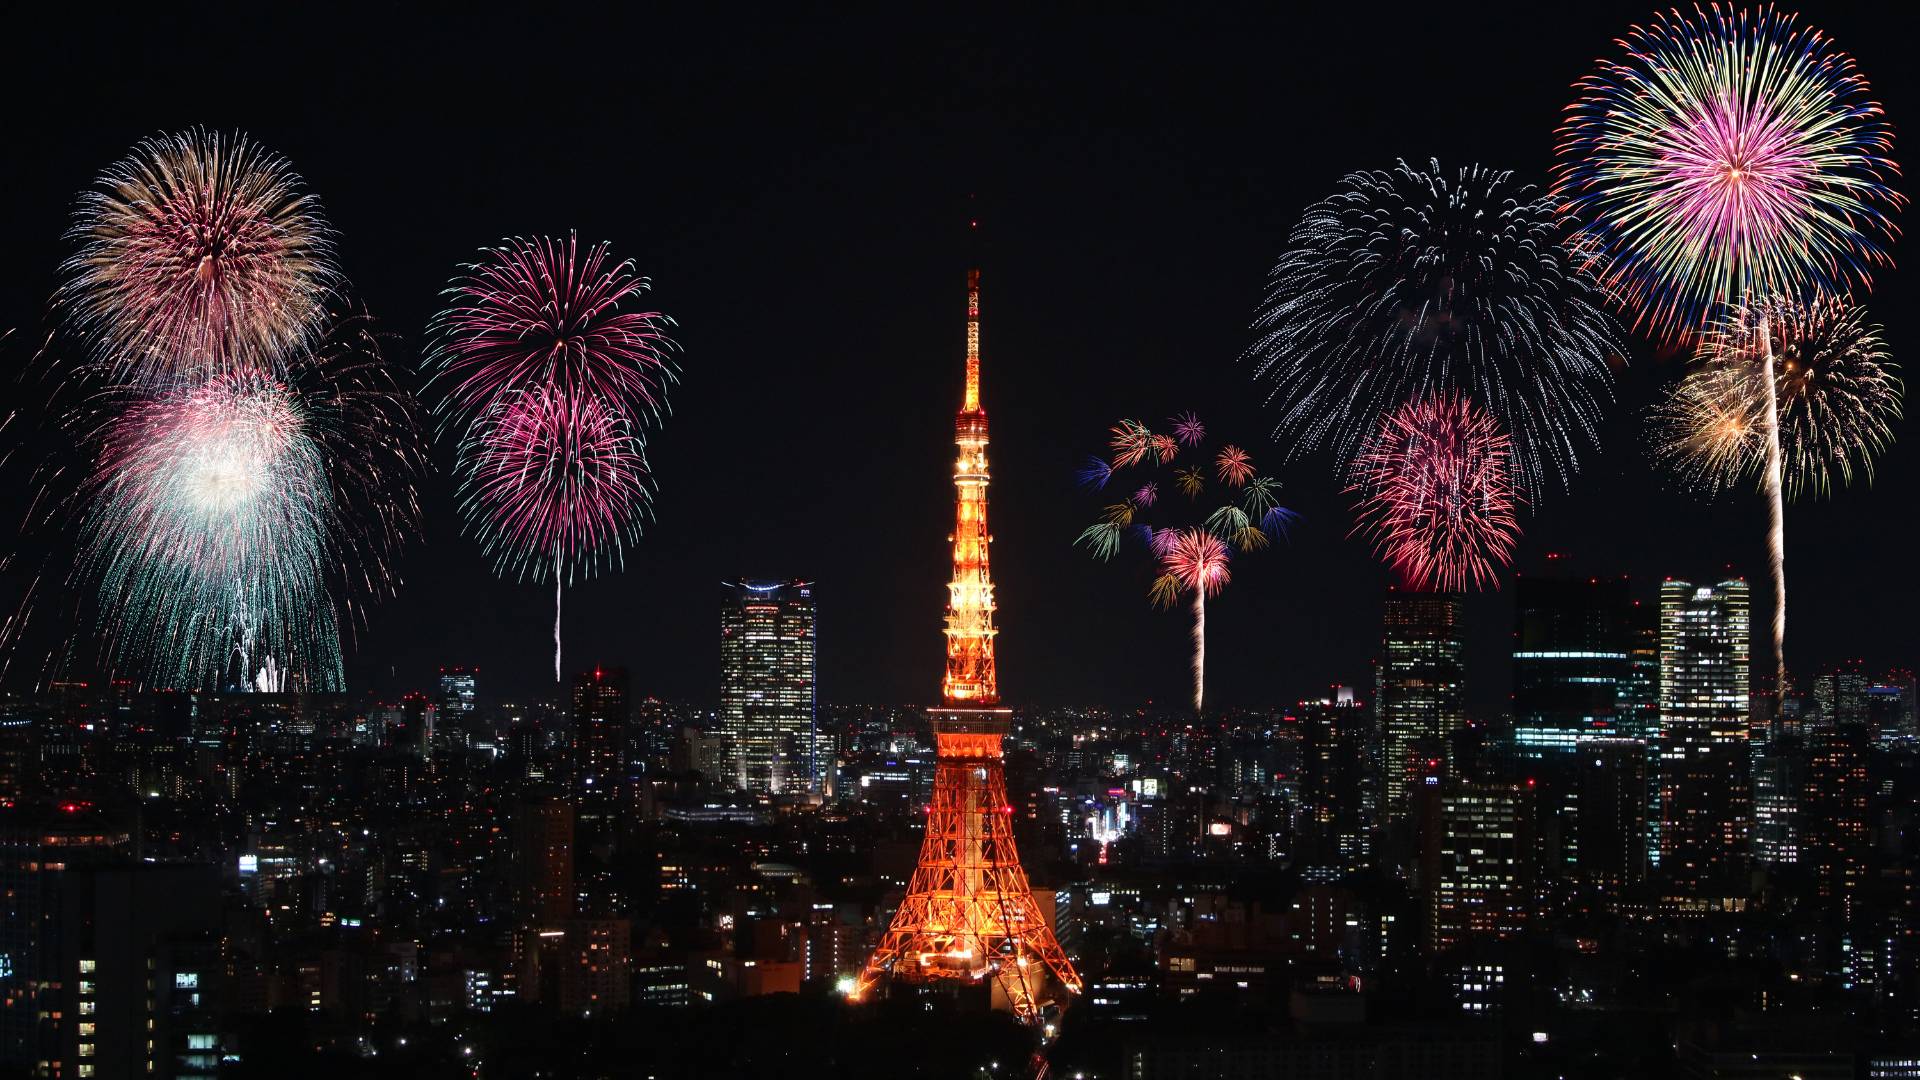 New Year’s Eve events in Tokyo Featured Image